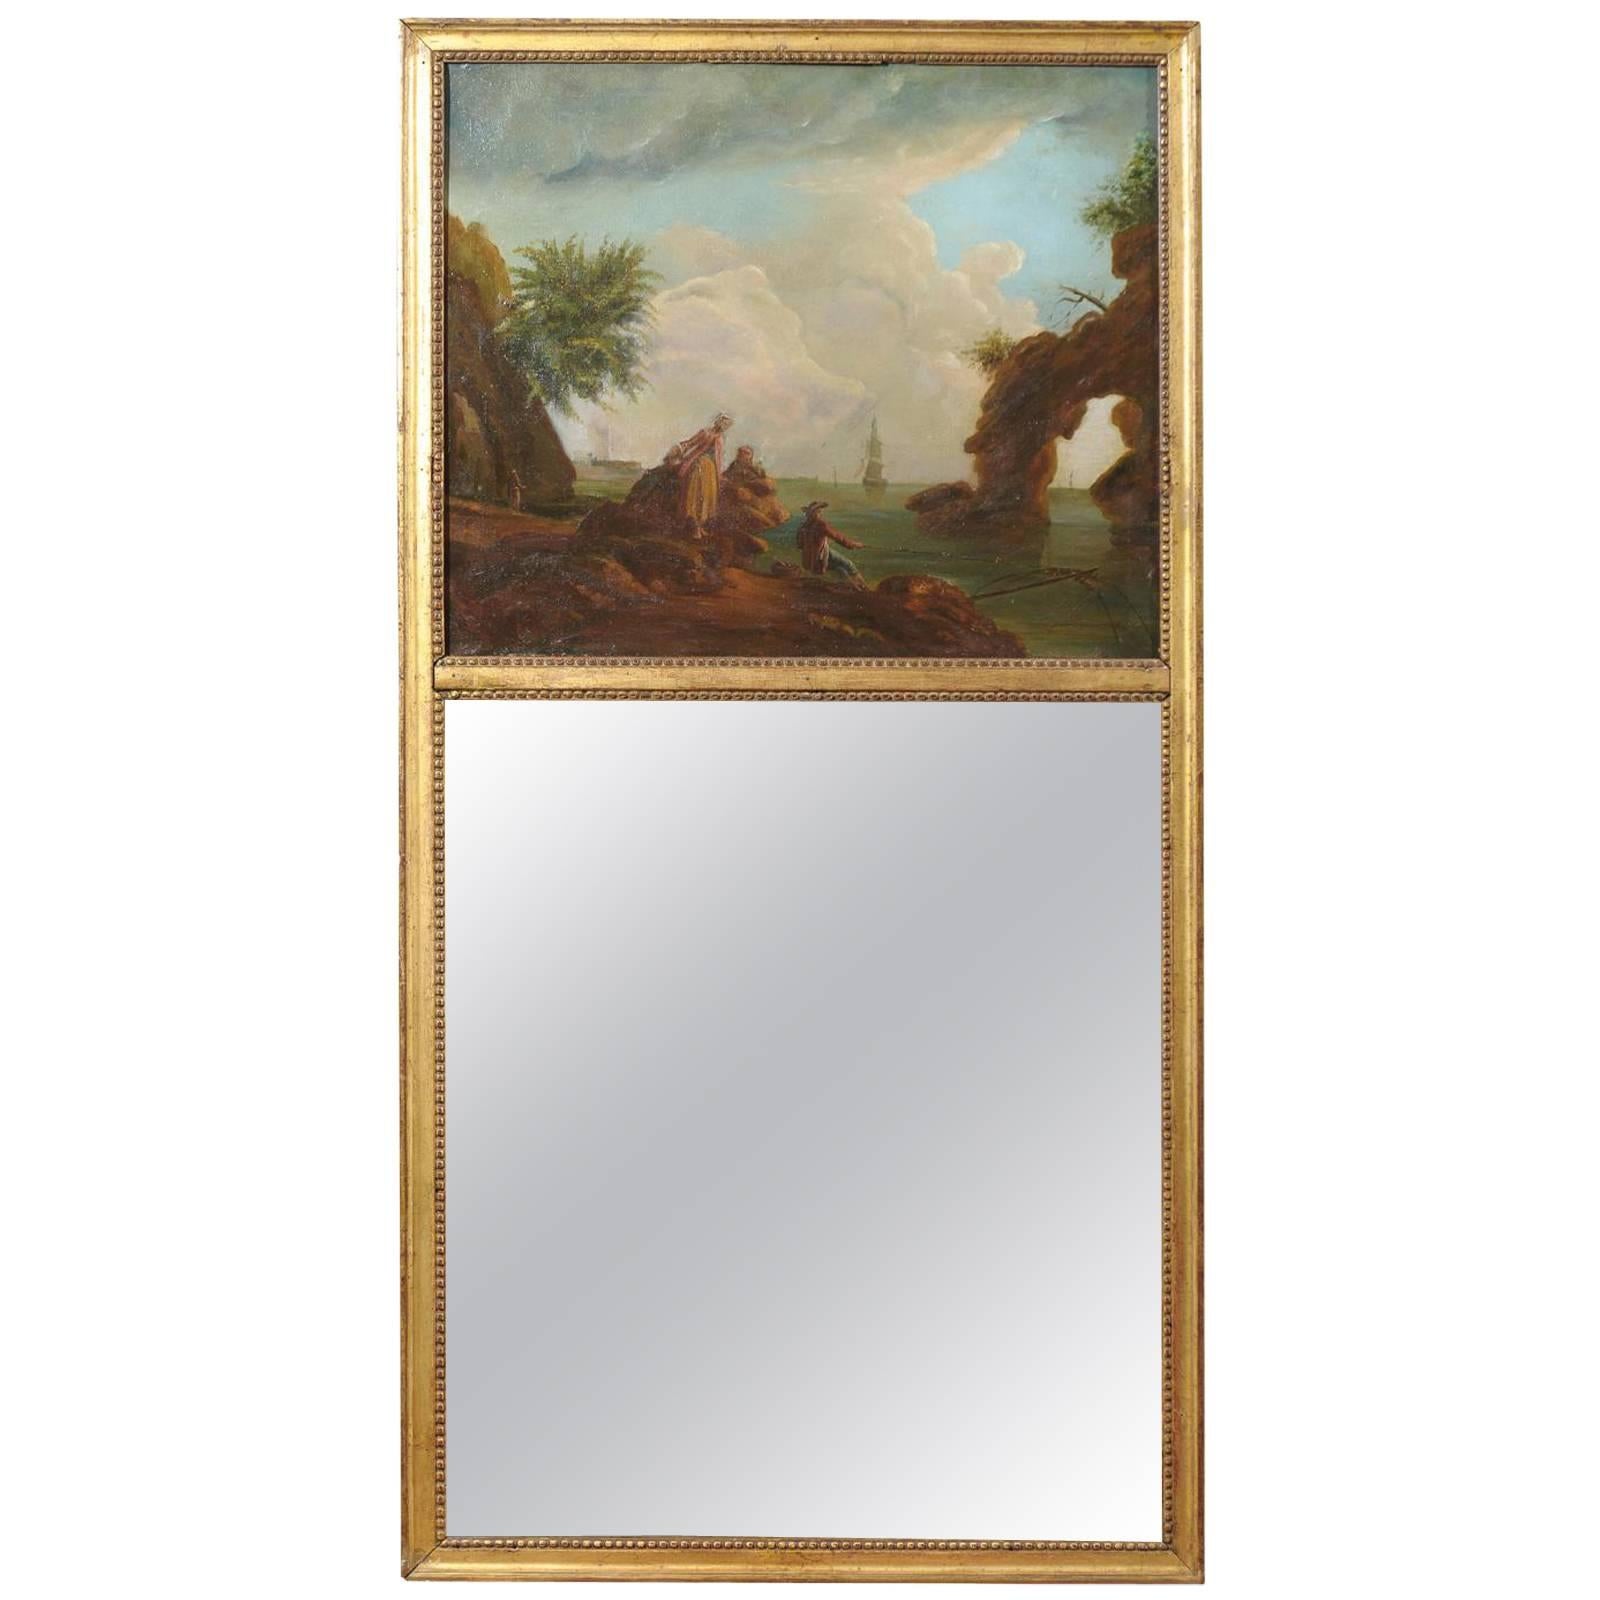 Continental Neoclassical Style Trumeua Mirror with Oil Canvas Landscape Painting